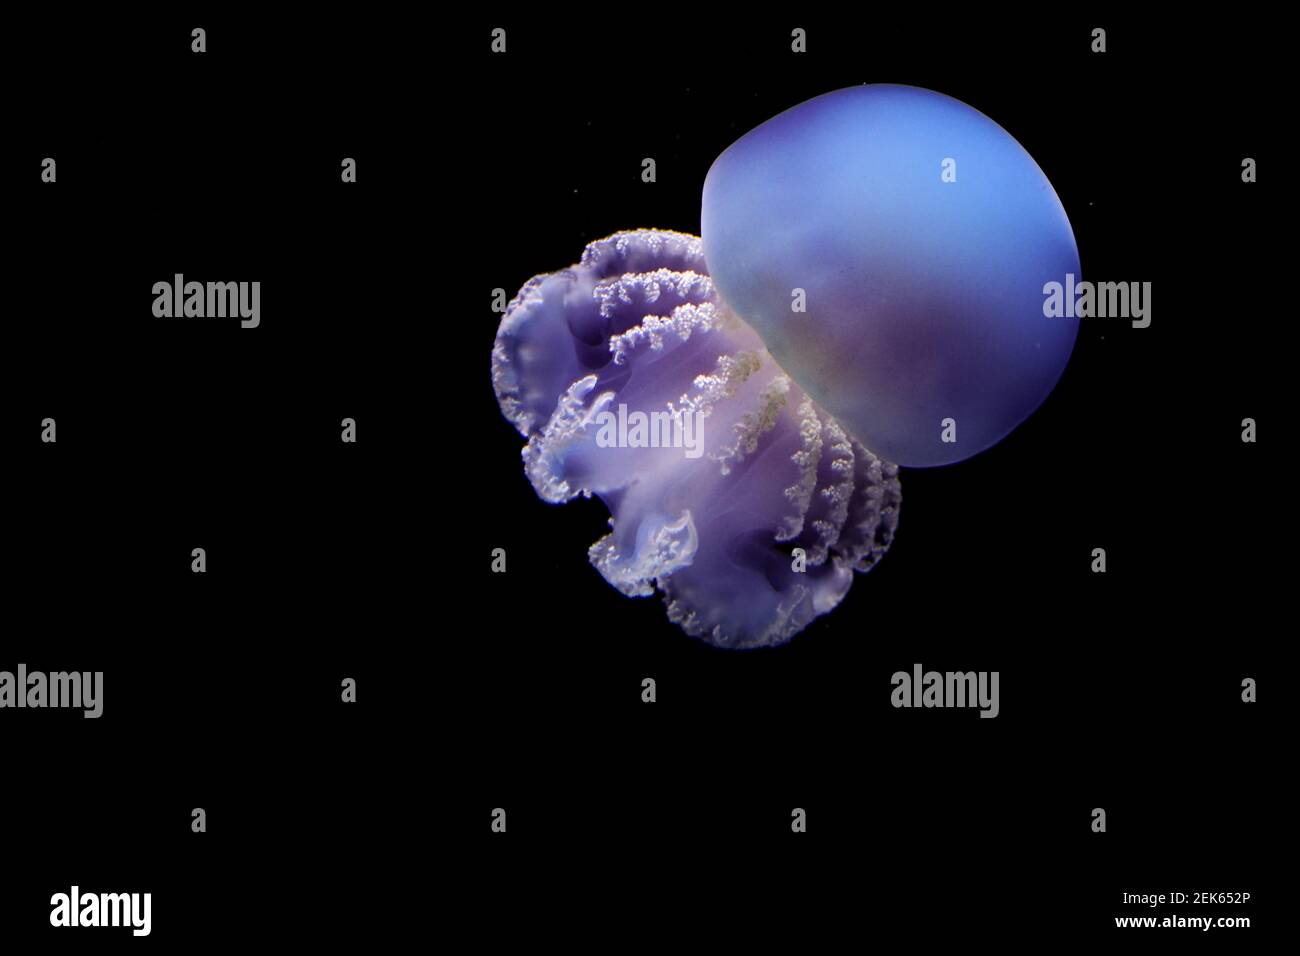 Young adult mediterranean jellyfish before a black background Stock Photo